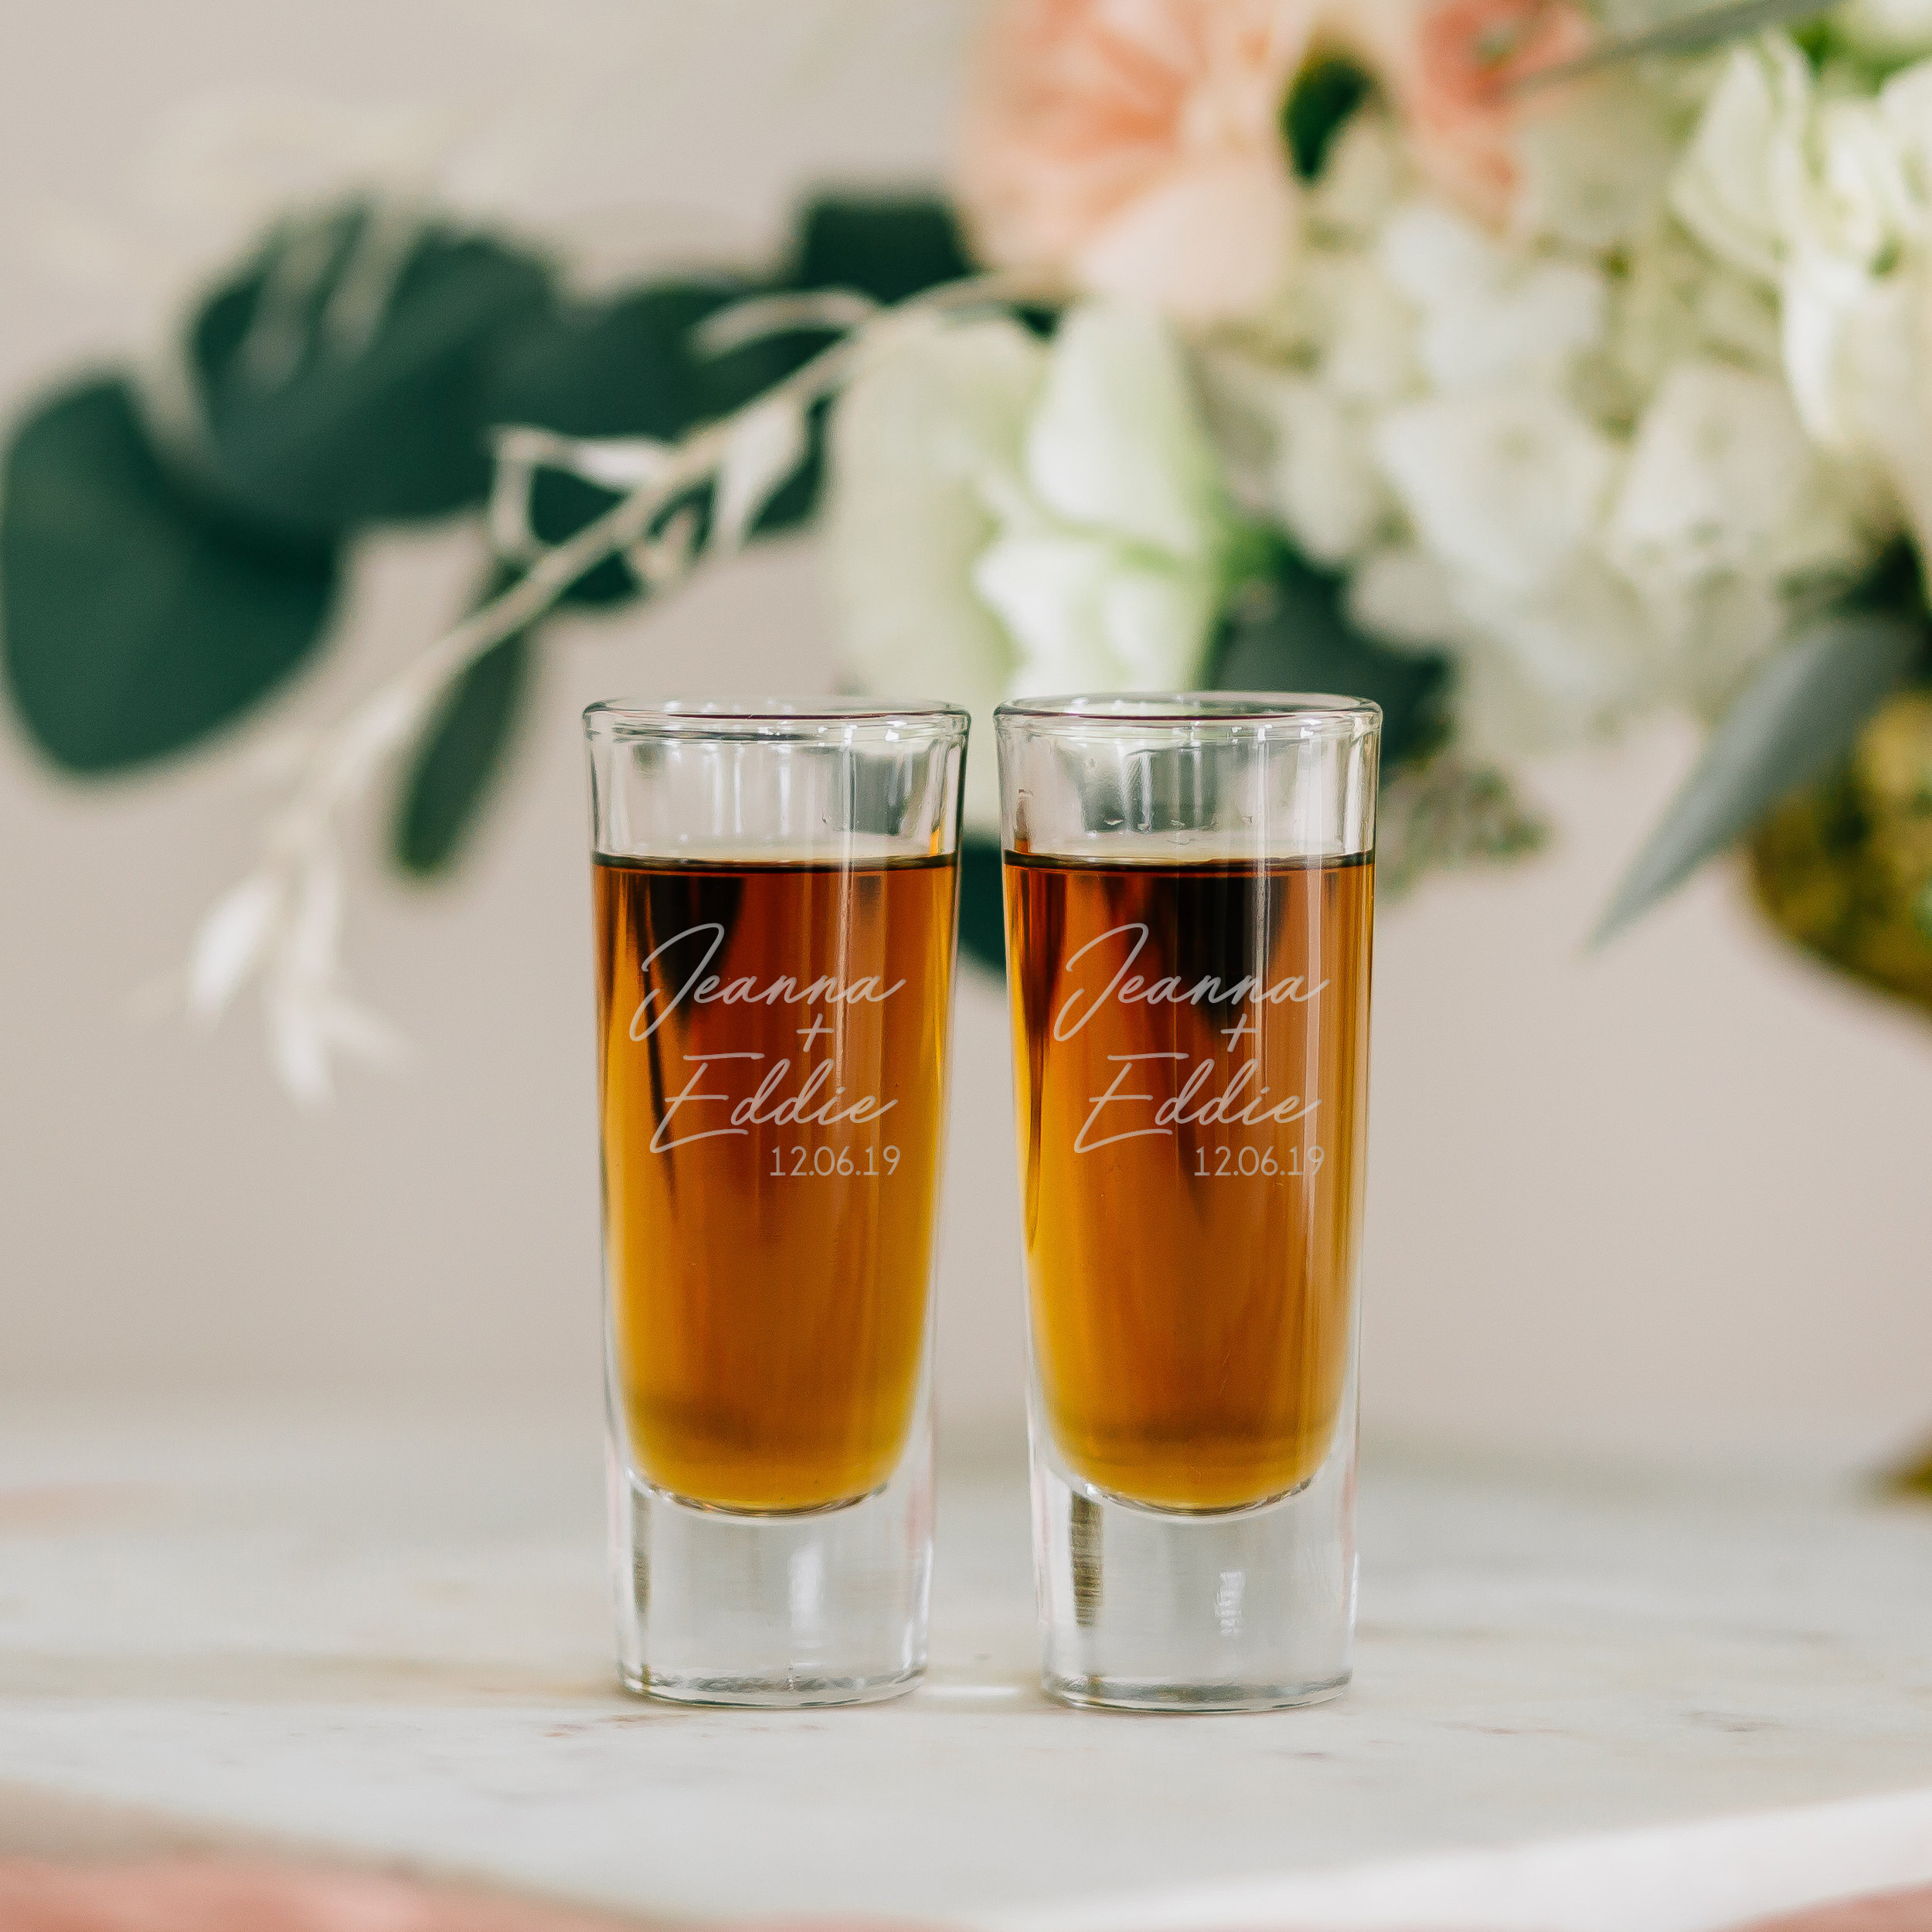 and Engagement Bride Groom Couple Shot Glasses with Gold Foil Print for Newlyweds Bridal Shower Party Shot Glasses 2 oz Each Anniversary Set of 2 